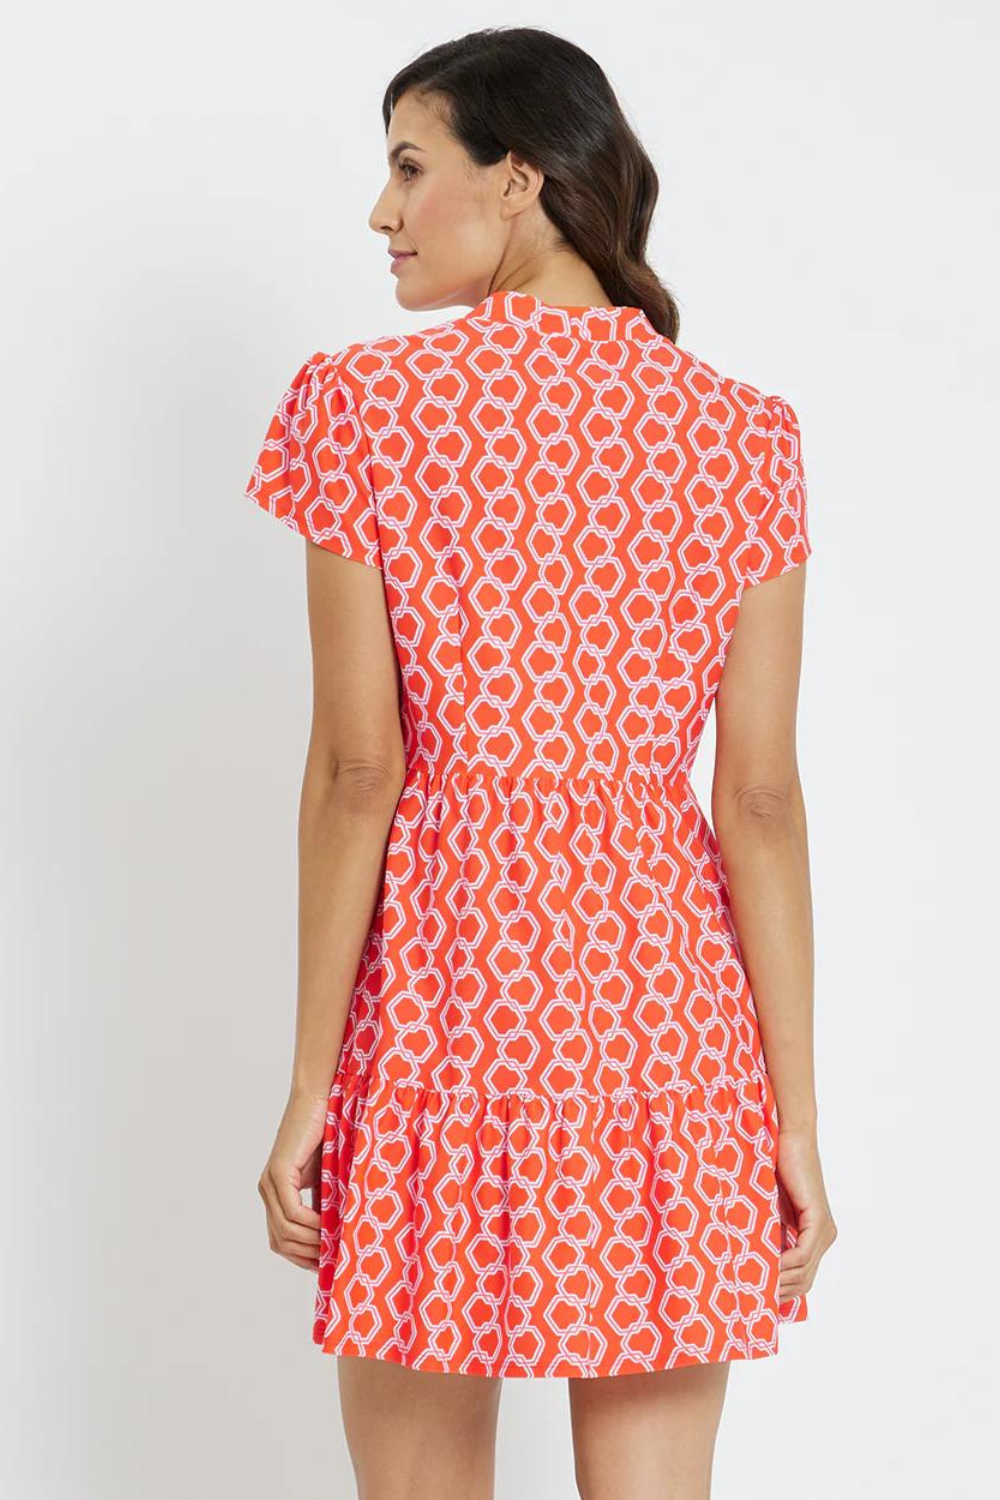 Jude Connally Ginger Dress - Dancing Links Apricot